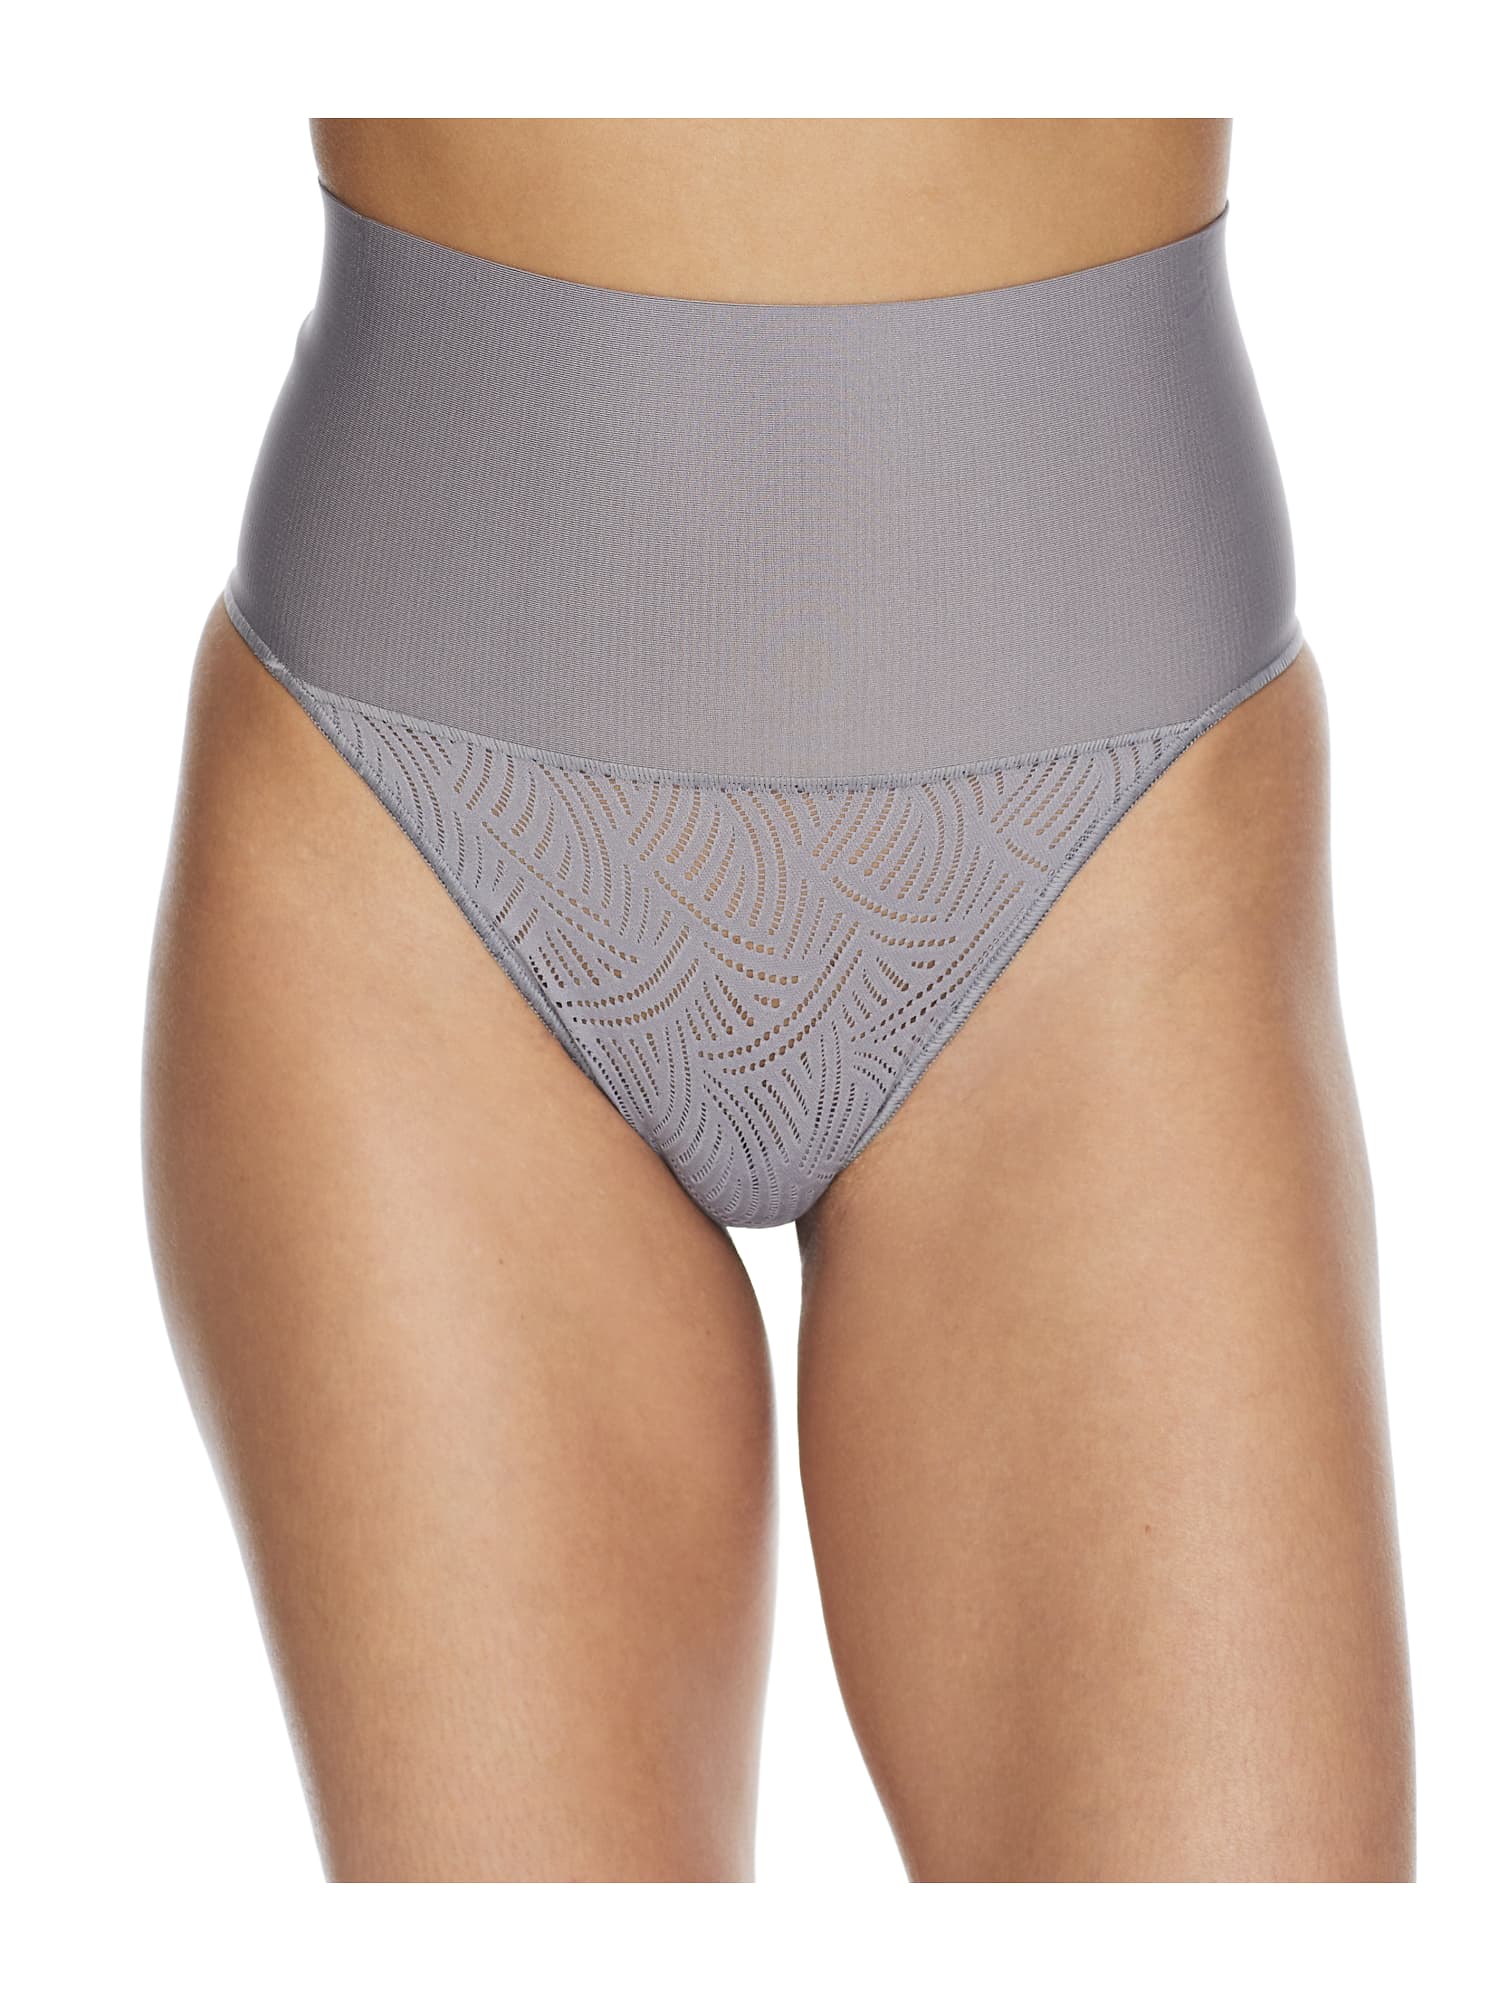 Maidenform Women's Tame Your Tummy Panties, Firm Control Shapewear